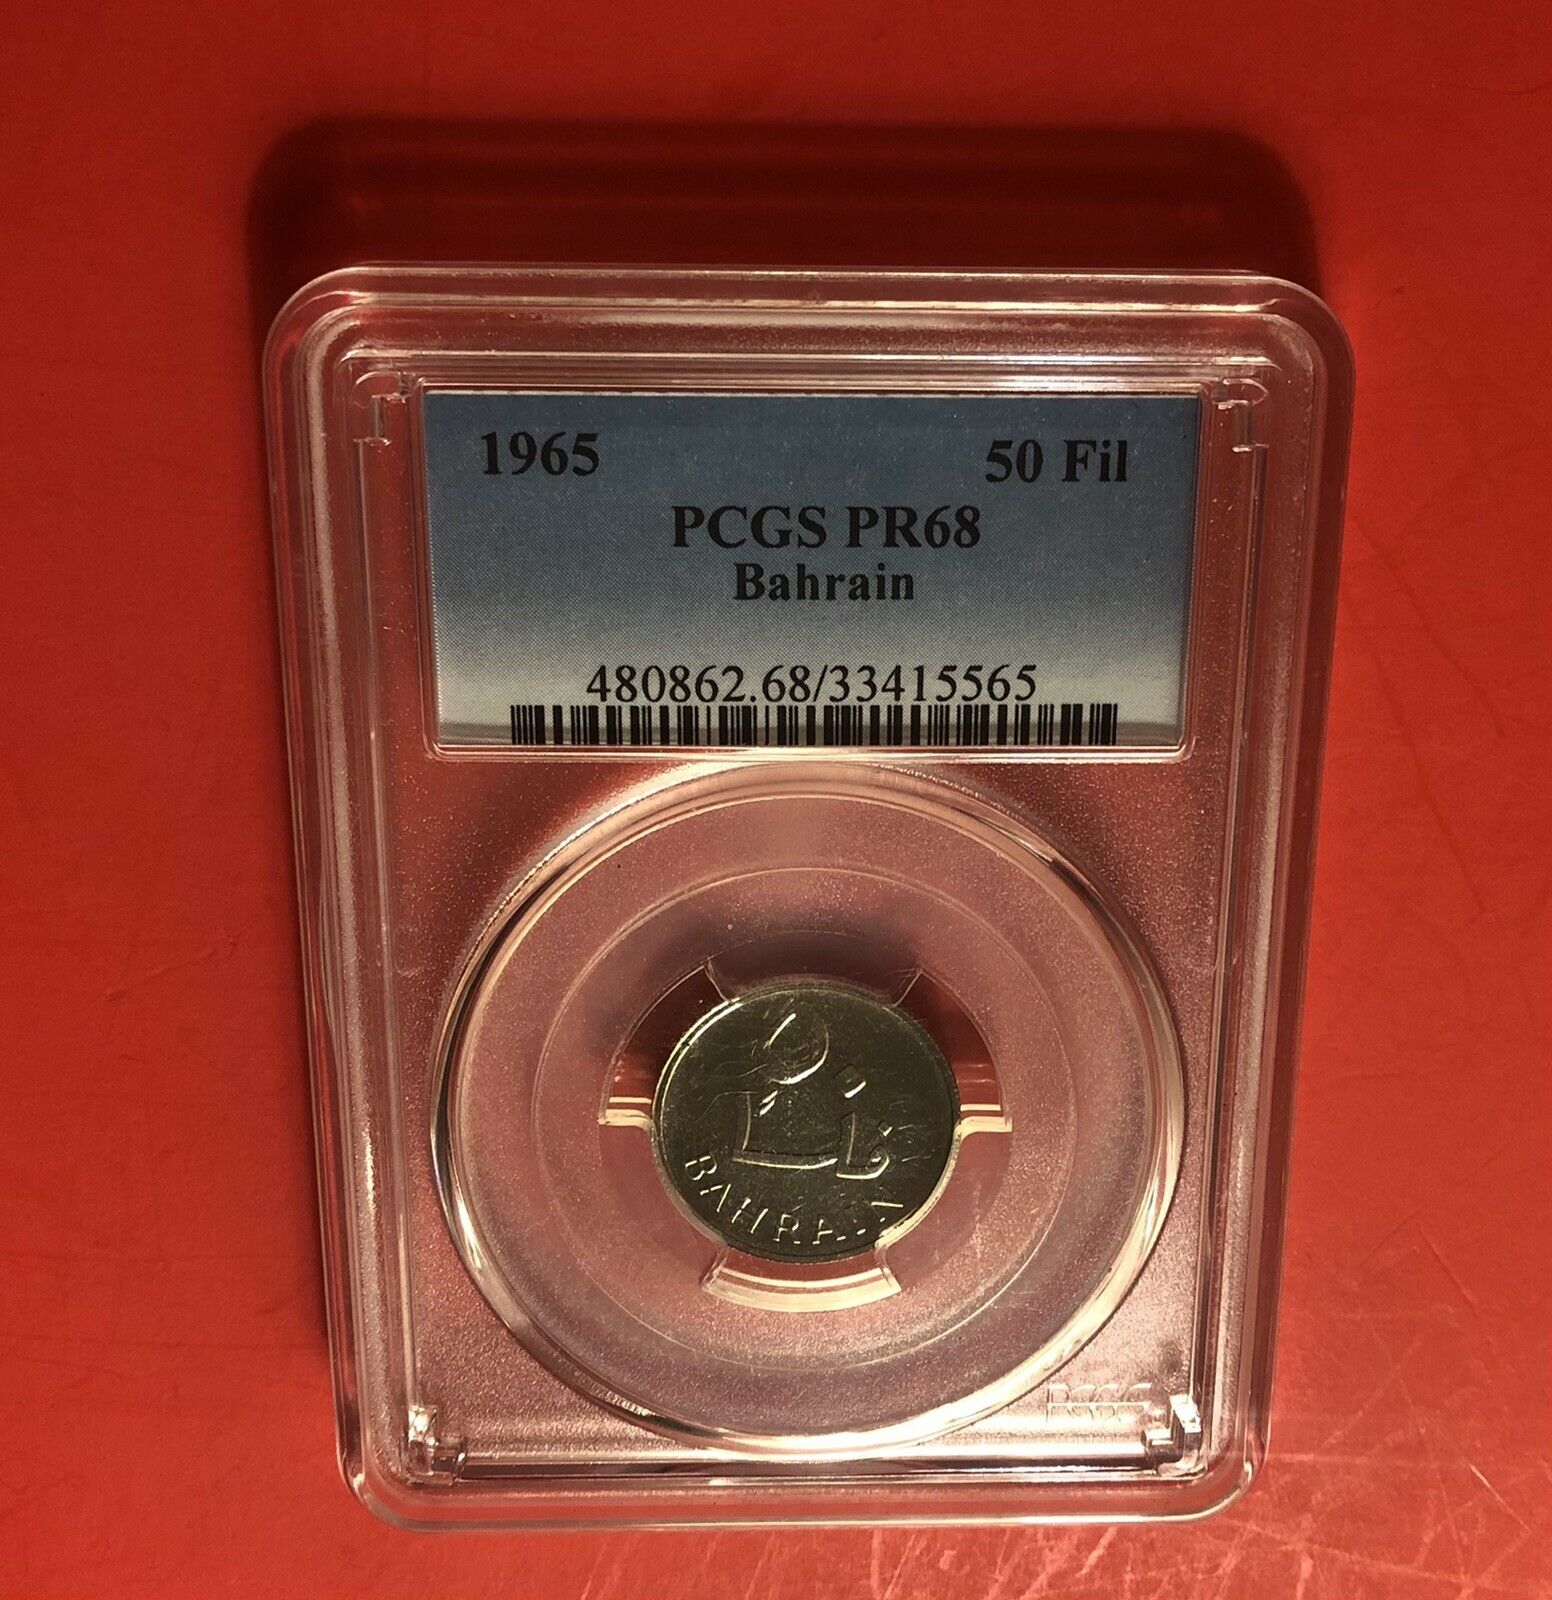 1965-bahrain-50 Fils Proof Coin ,graded By Pcgs Pr68..rare